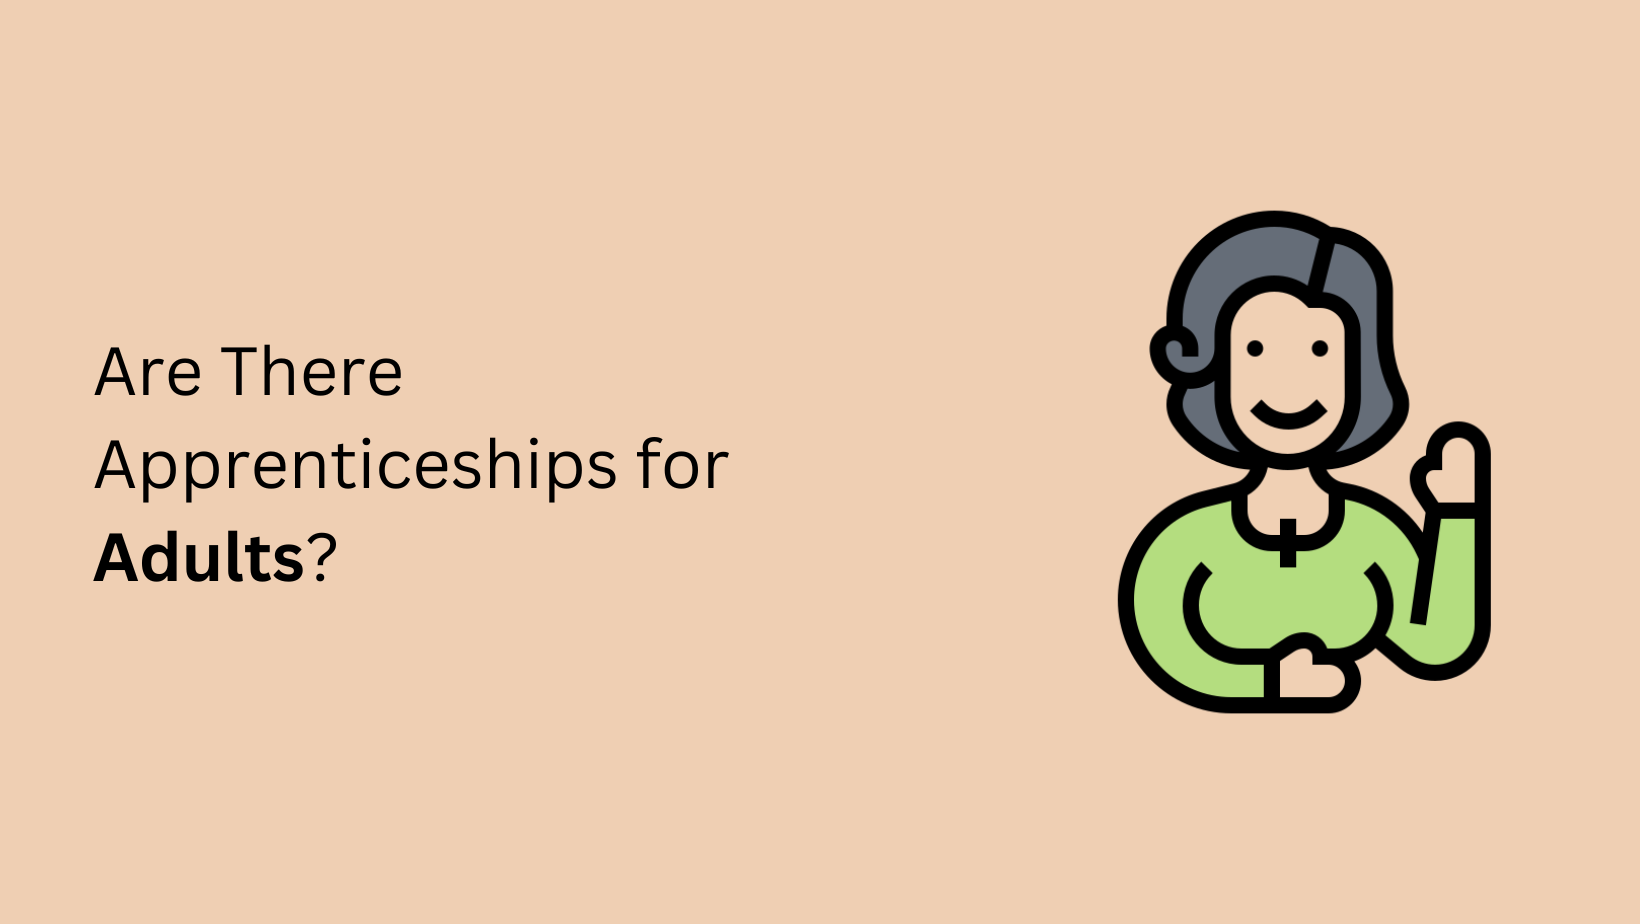 Are There Apprenticeships for Adults